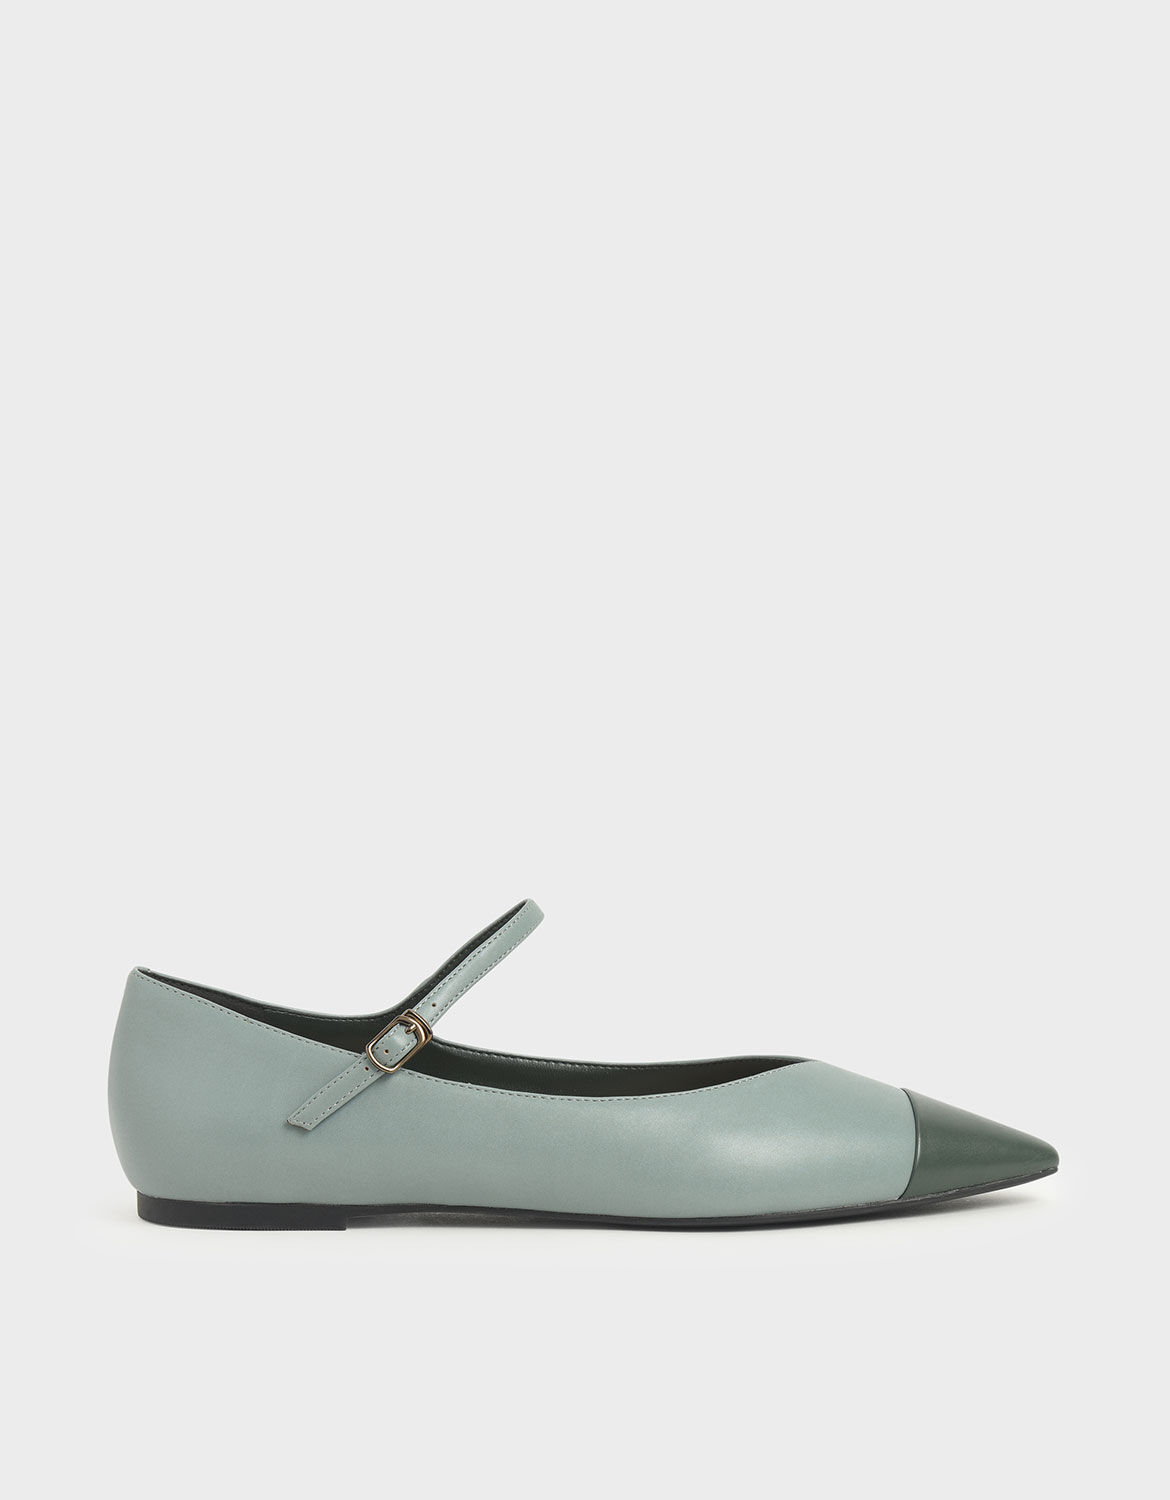 Two-Tone Pointed Toe Mary Jane Flats